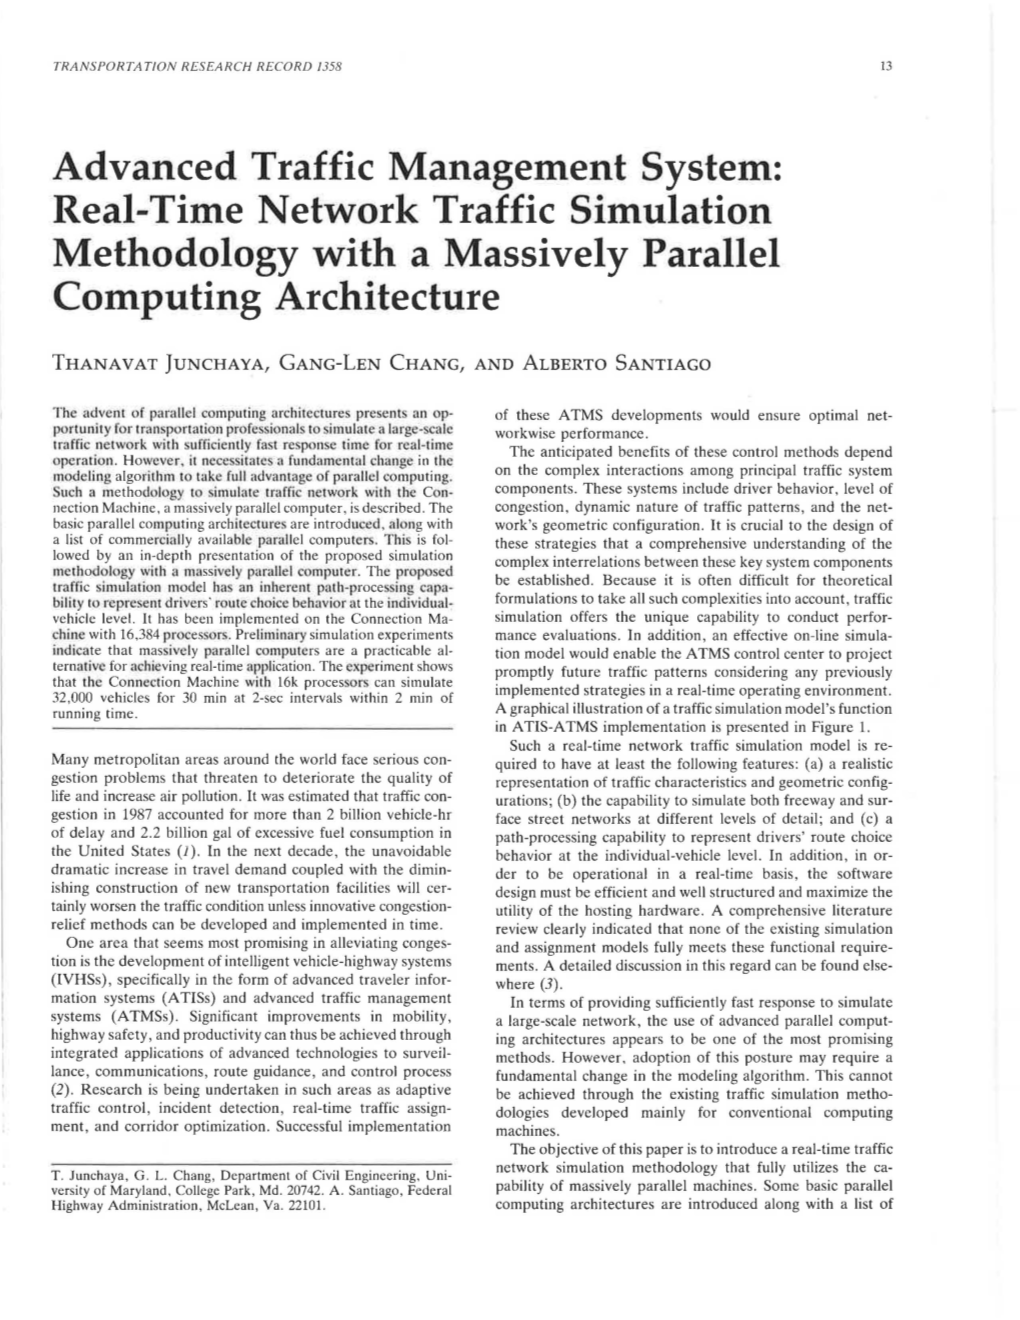 Real-Time Network Traffic Simulation Methodology with a Massively Parallel Computing Architecture